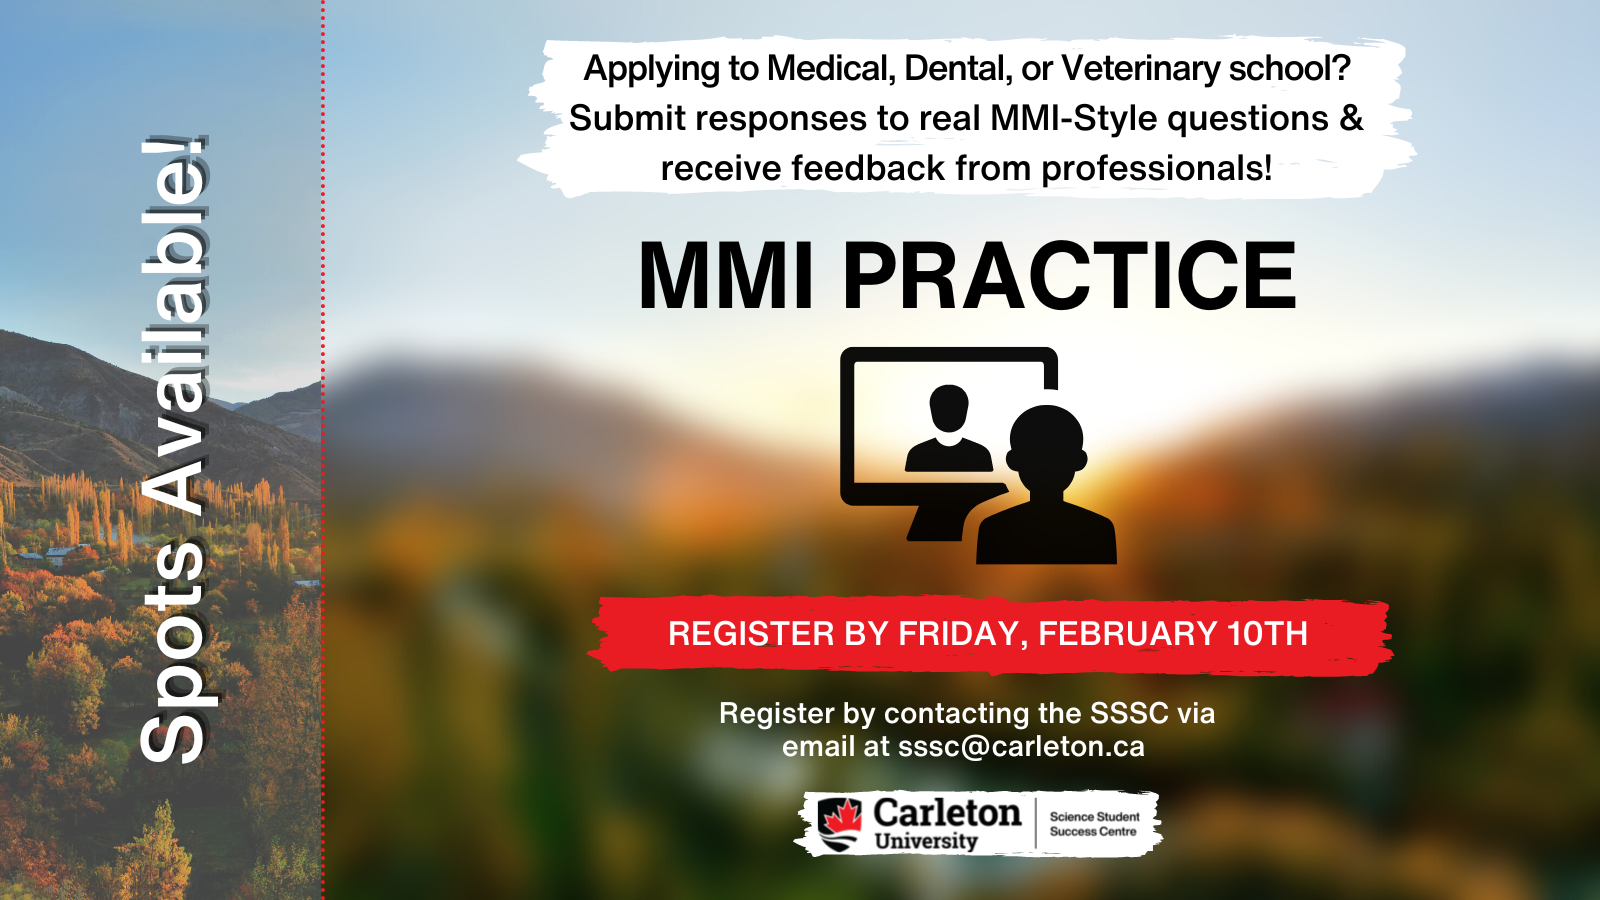 Poster with text. Background image blurred and faded of sun rise amongst a mountain landscape. Text vertical on the left: Spots Available! Text on right reads: Applying to Medical, Dental, or Veterinary school? Submit response to real MMI-Style questions and receive feedback from professionals! MMI PRACTICE. REGISTER BY FRIDAY, FEBUARY 10TH. Register by contacting the SSSC via email at sss[at]carleton.ca. Carleton University, Science Student Success Centre.